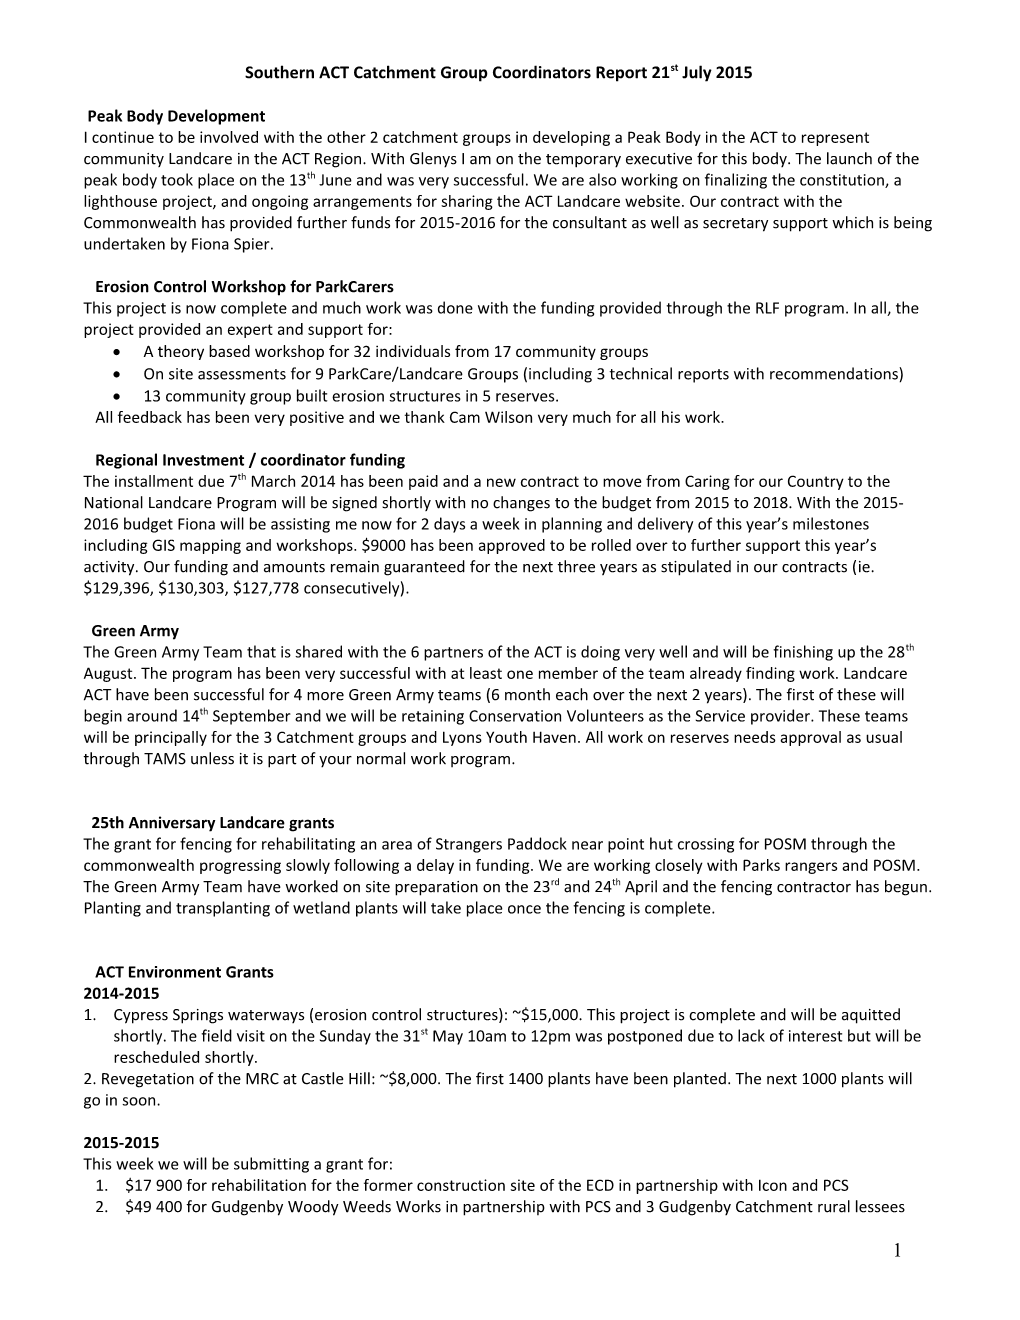 Southern ACT Catchment Group Coordinators Report 21St July 2015